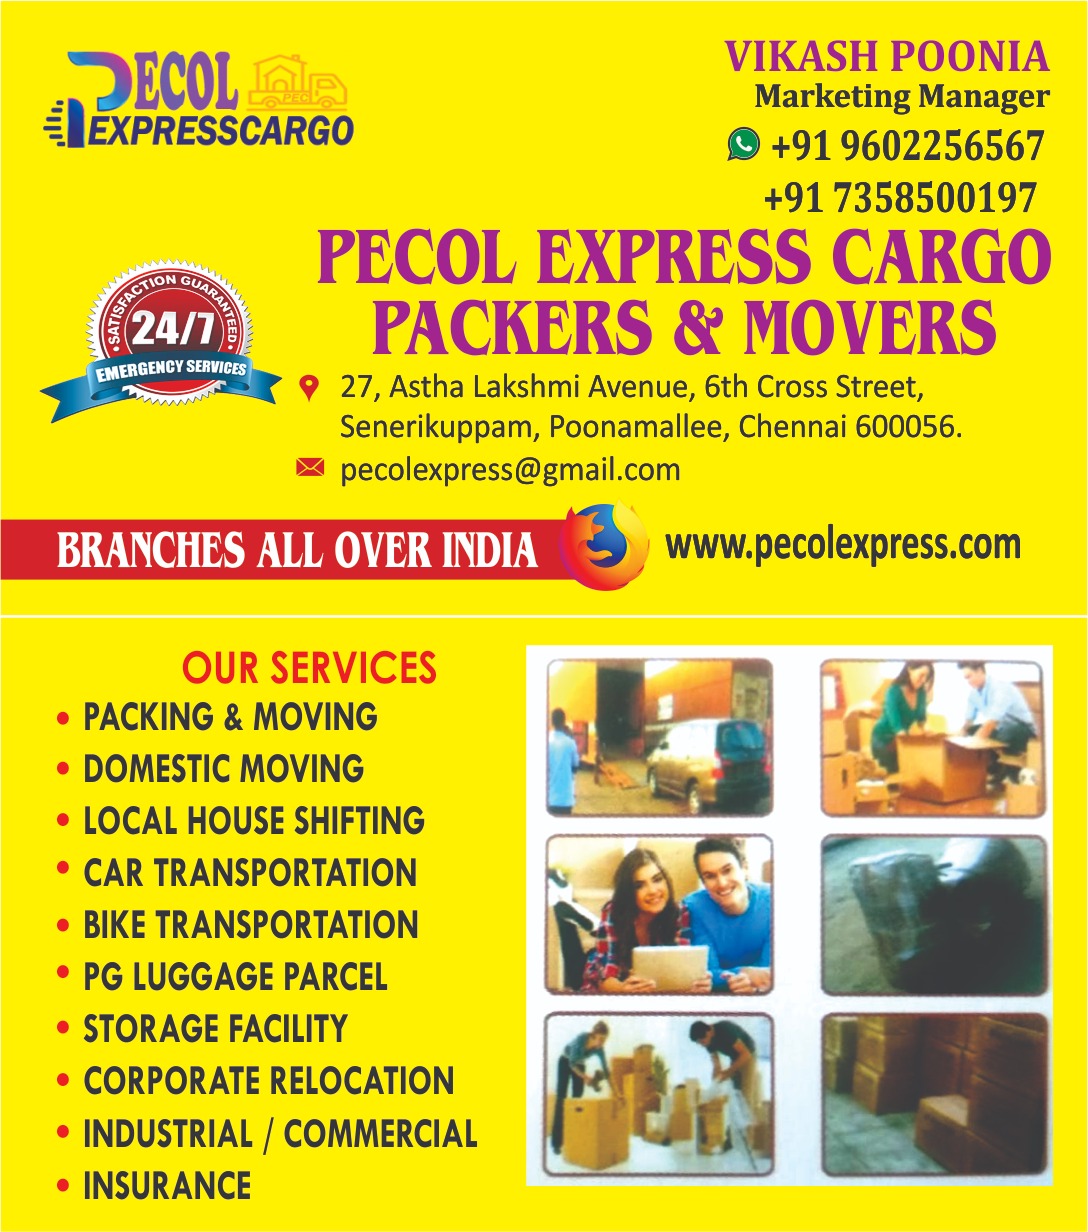 Packers and Movers Poonamallee - PECOL Express Packers and Movers Chennai